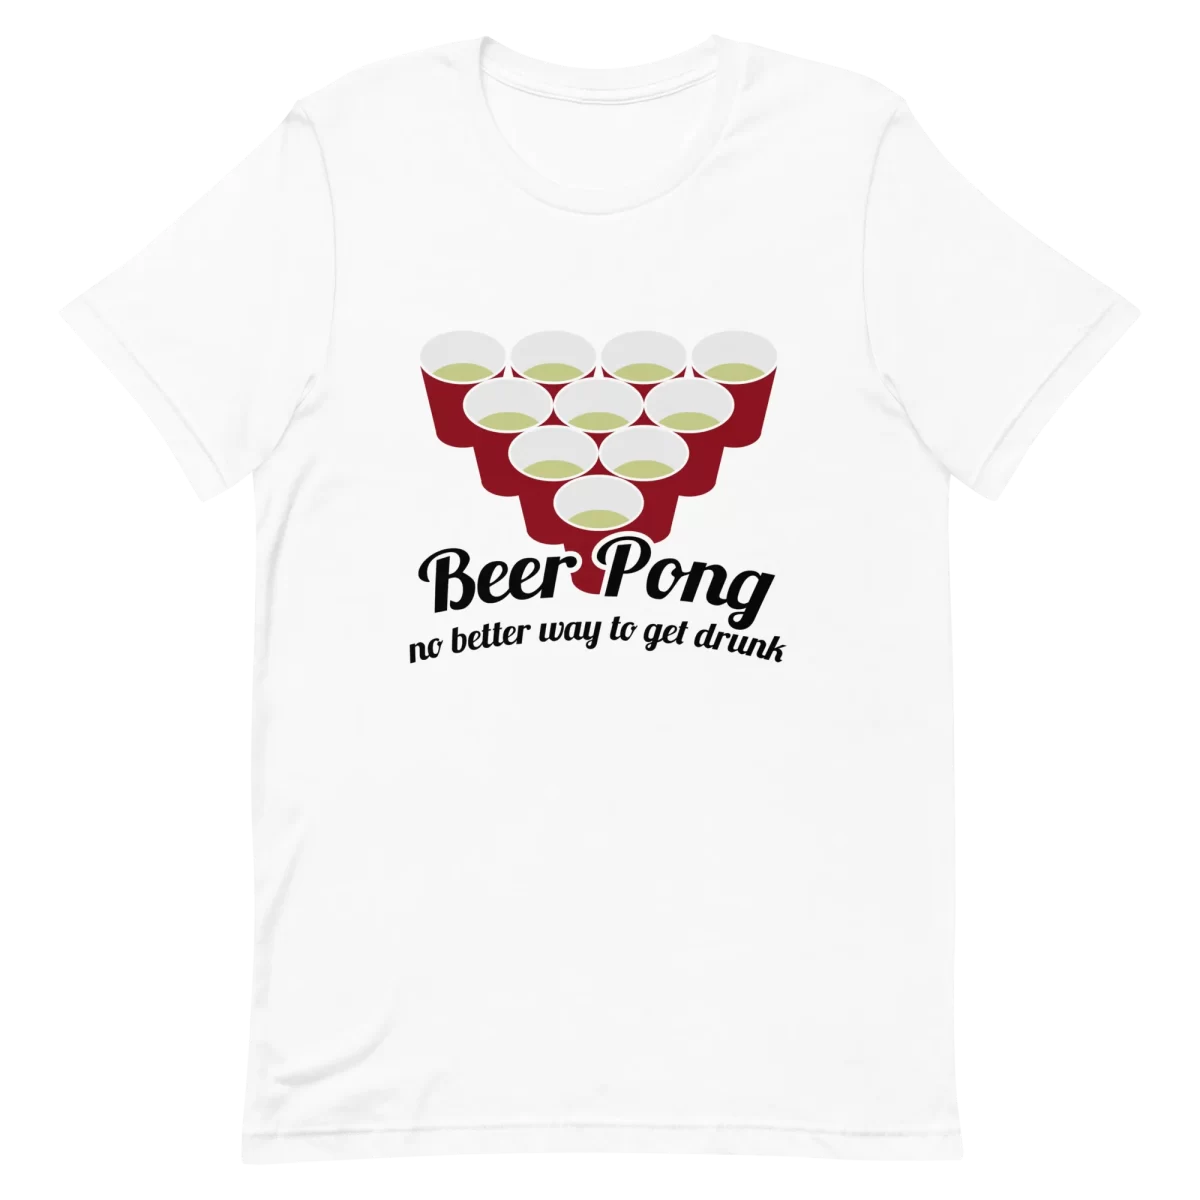 Unisex T-Shirt - Beer Pong No Better Way To Get Drunk - White